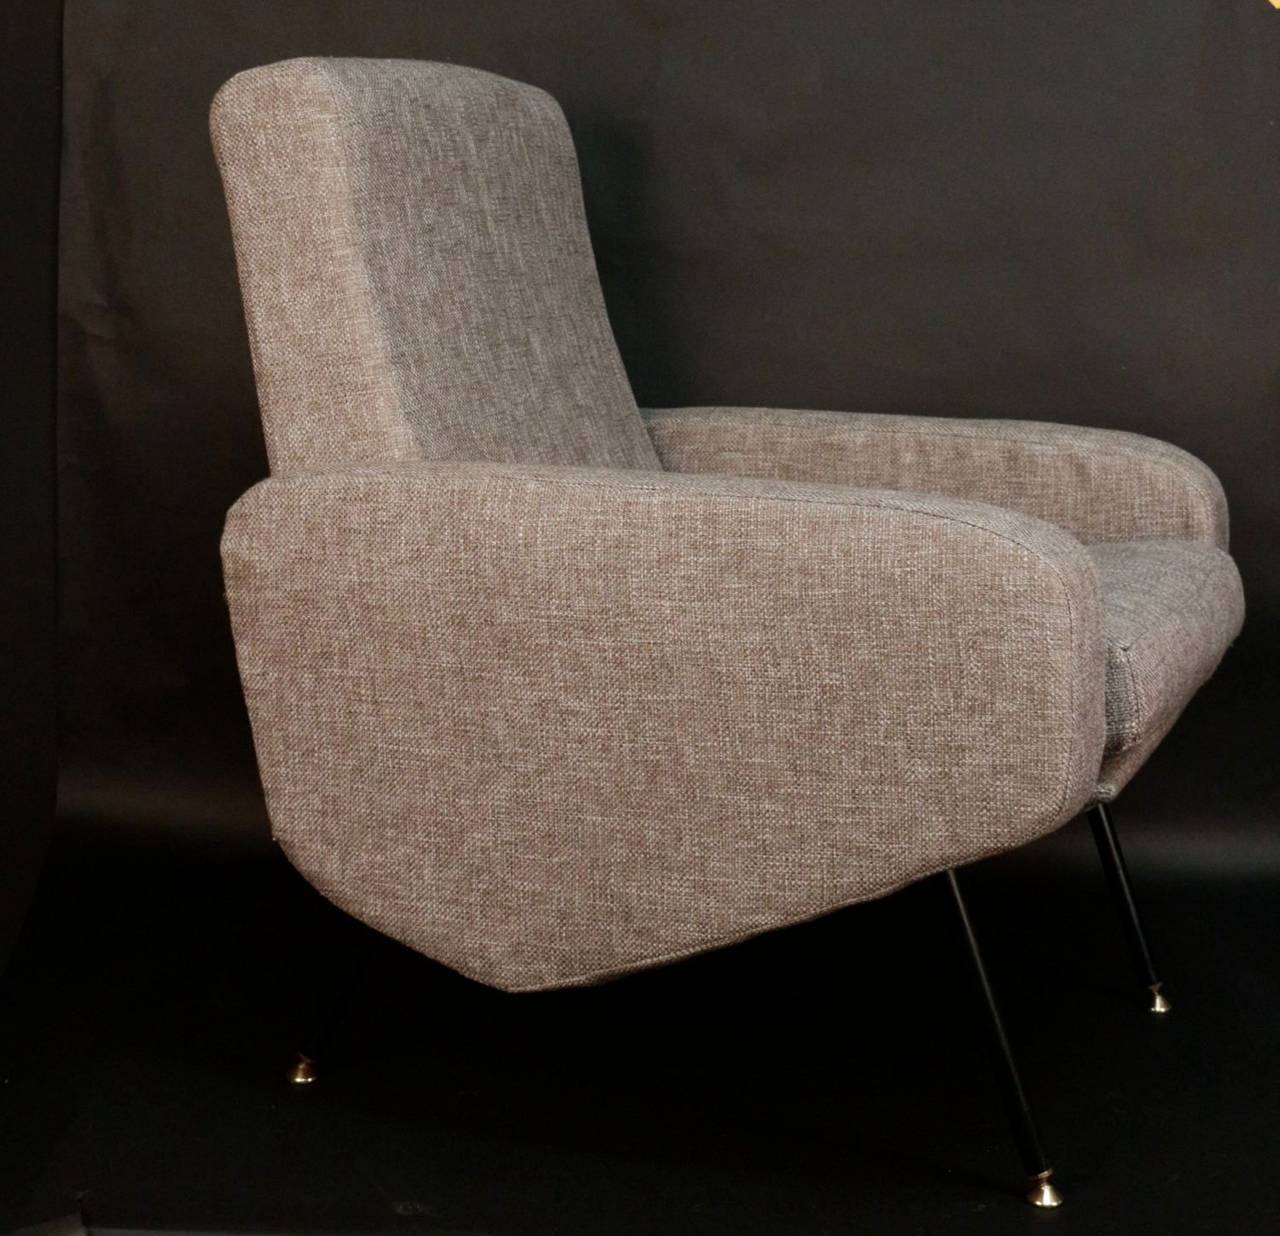 Pair of Pierre Guariche Troika model armchairs designed by Airborne in 1958.
These armchairs are covered with gray woolen fabric. They are mounted on four black lacquered metal legs ending in brass ball bear mounted hooves.
These armchairs have